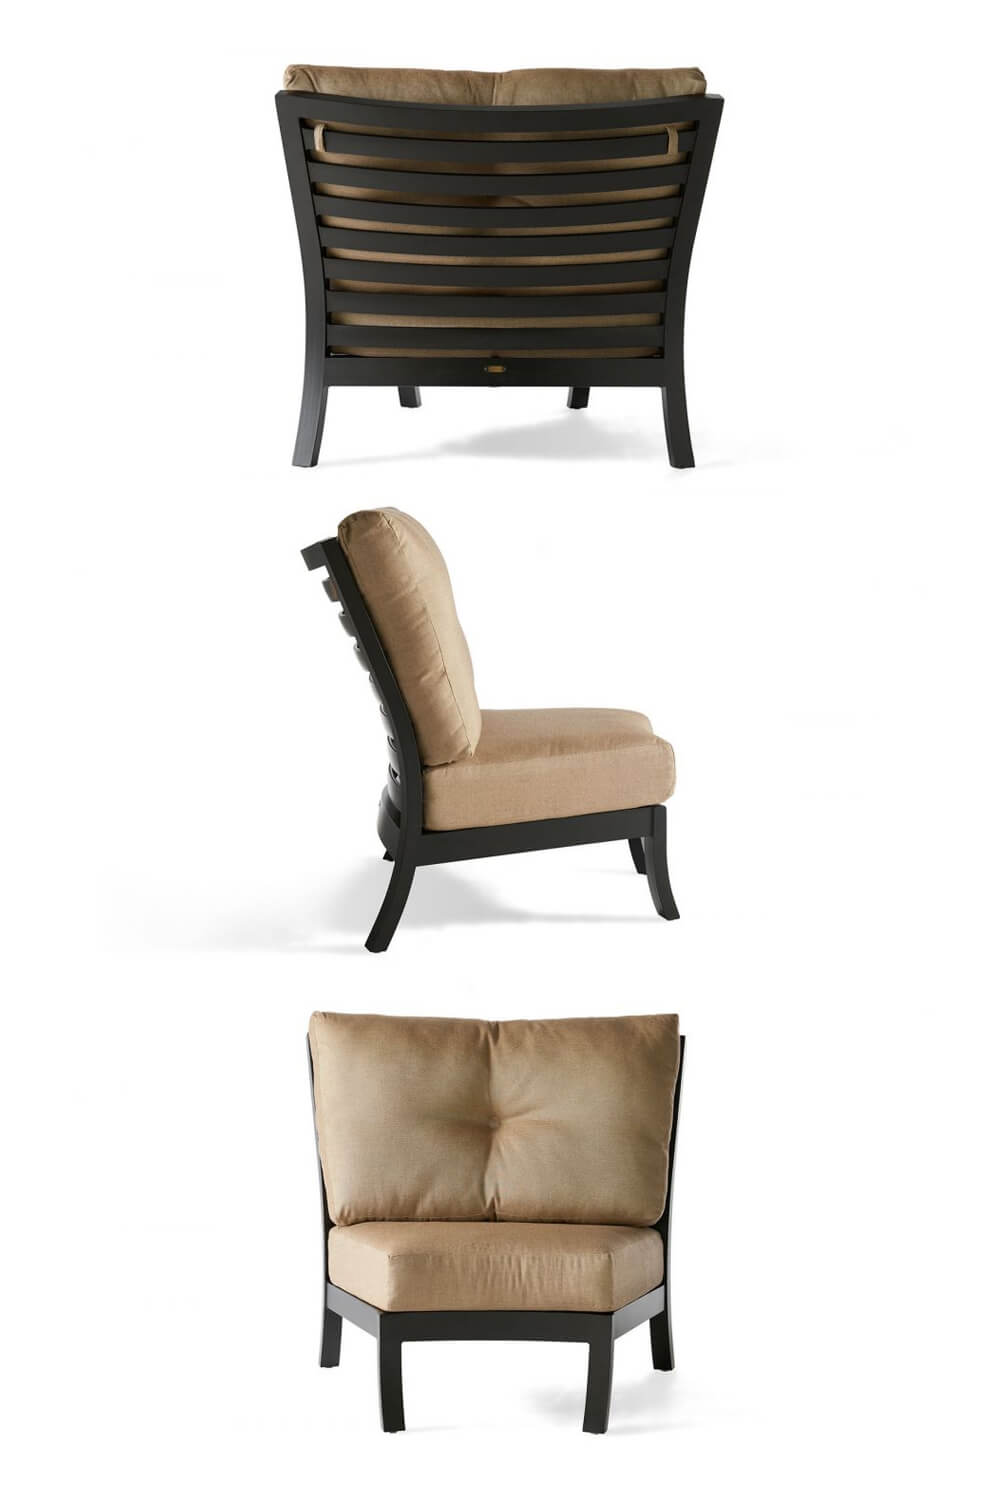 Mallin's Eclipse Outdoor Dining Chair - View of Back and Side